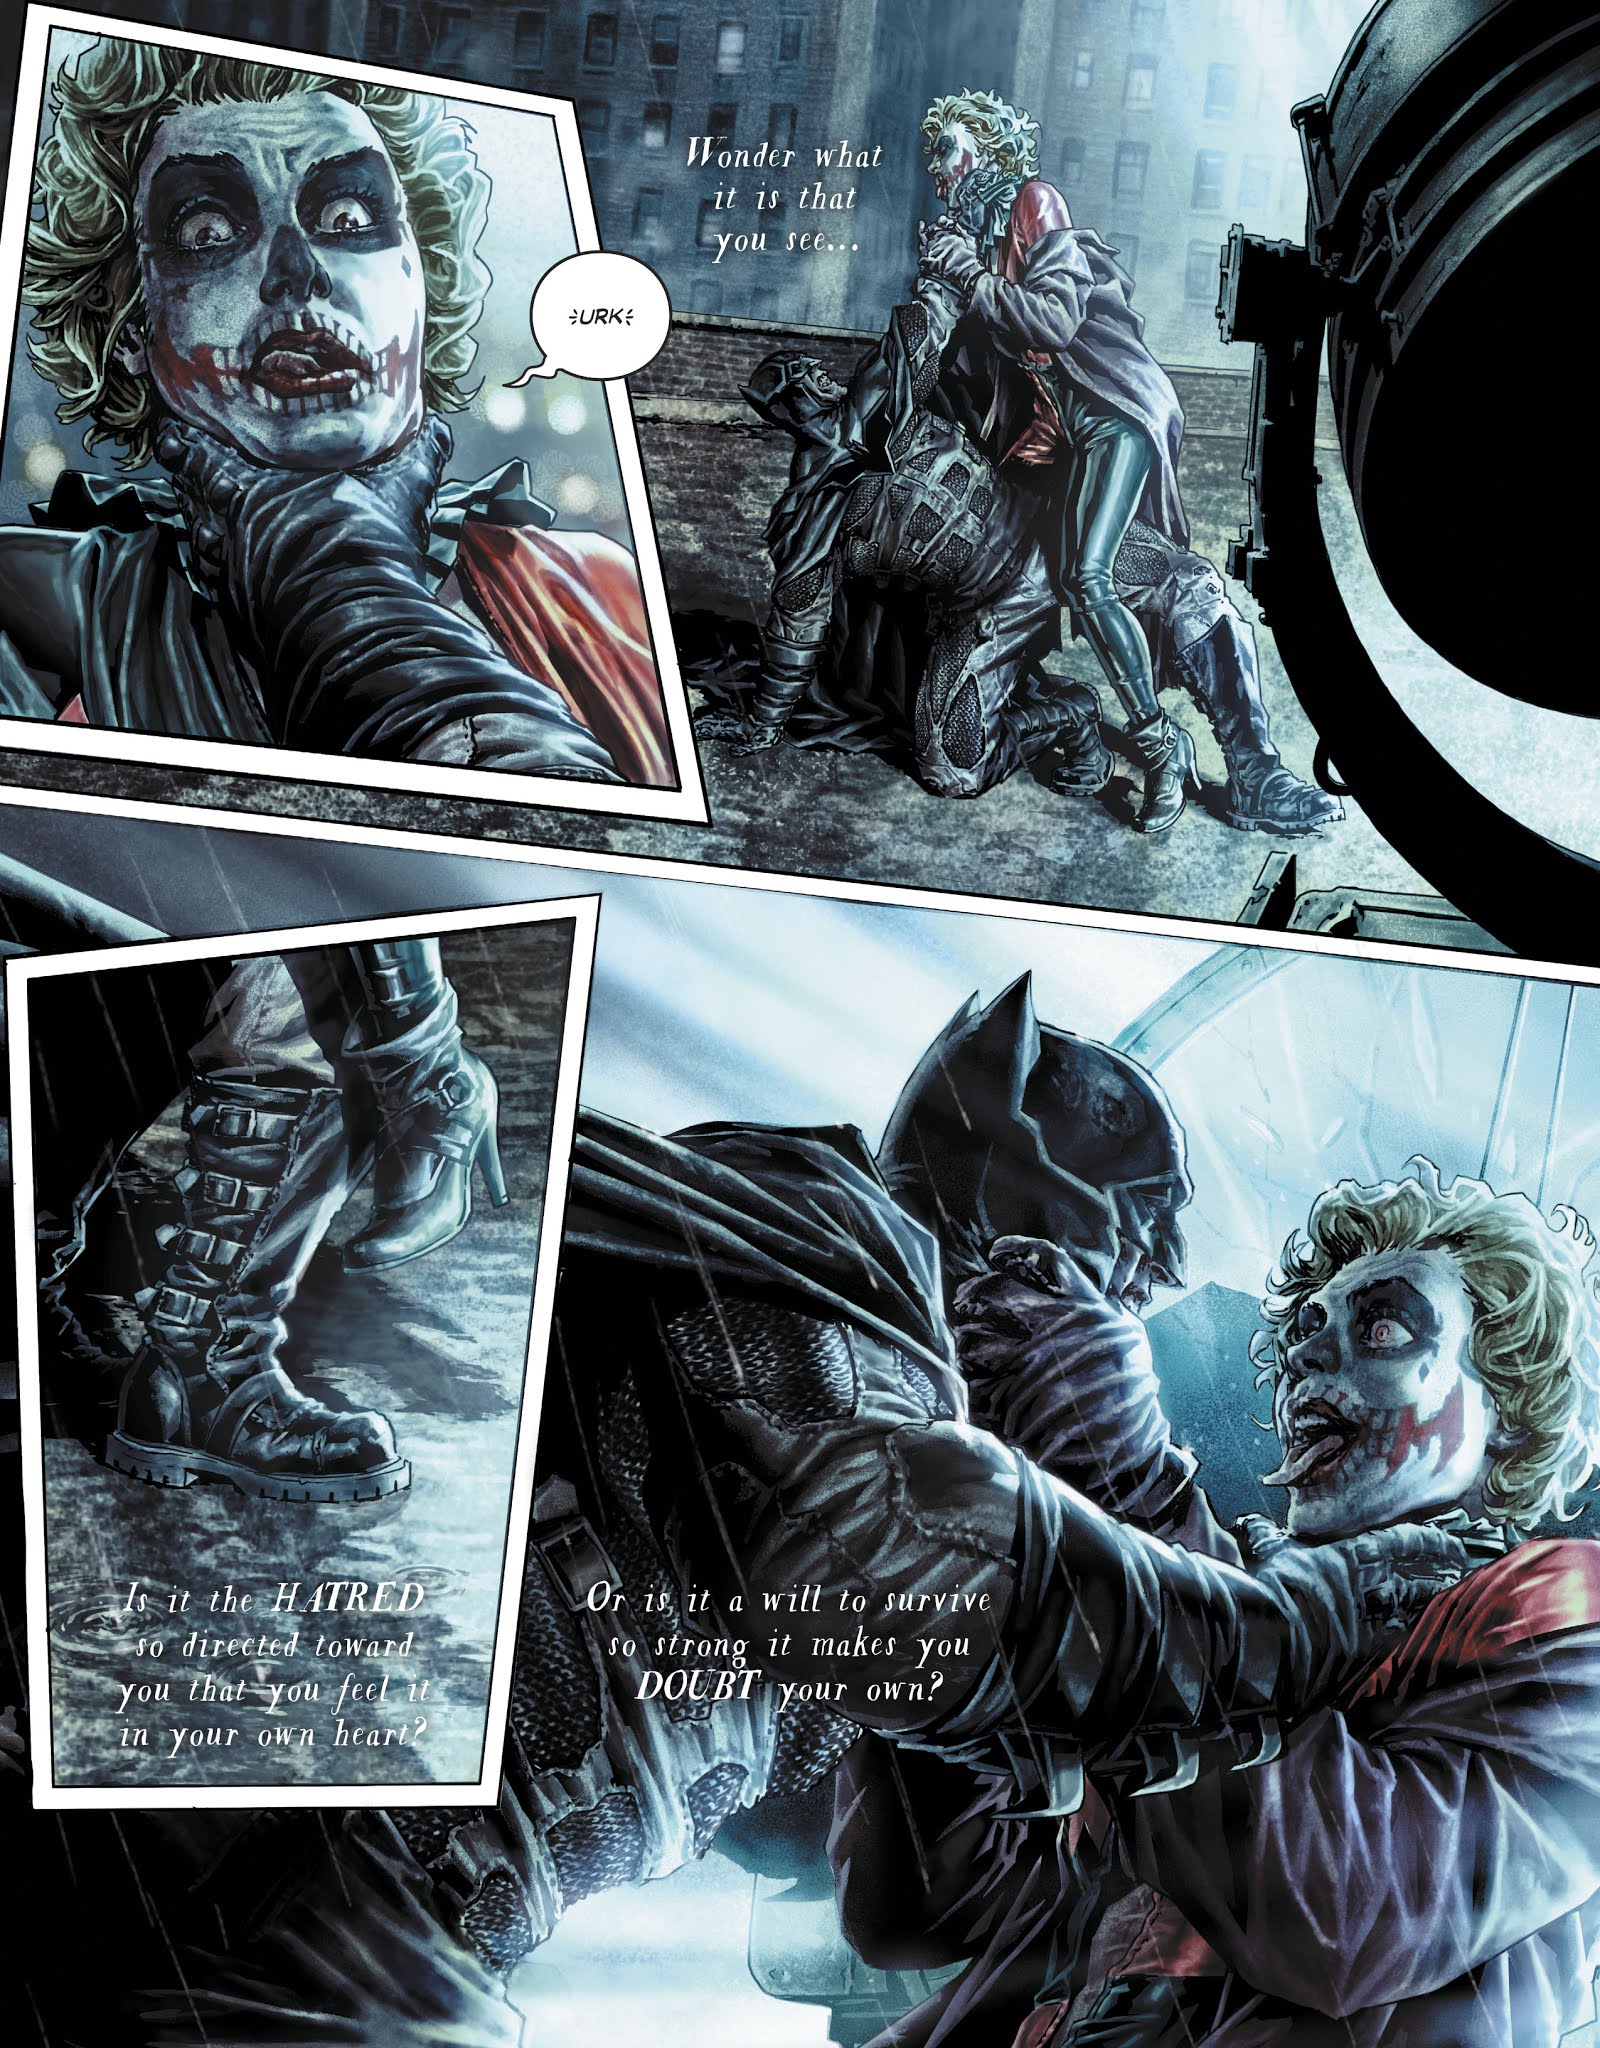 Batman Damned Issue 2 | Read Batman Damned Issue 2 comic online in high  quality. Read Full Comic online for free - Read comics online in high  quality .| READ COMIC ONLINE